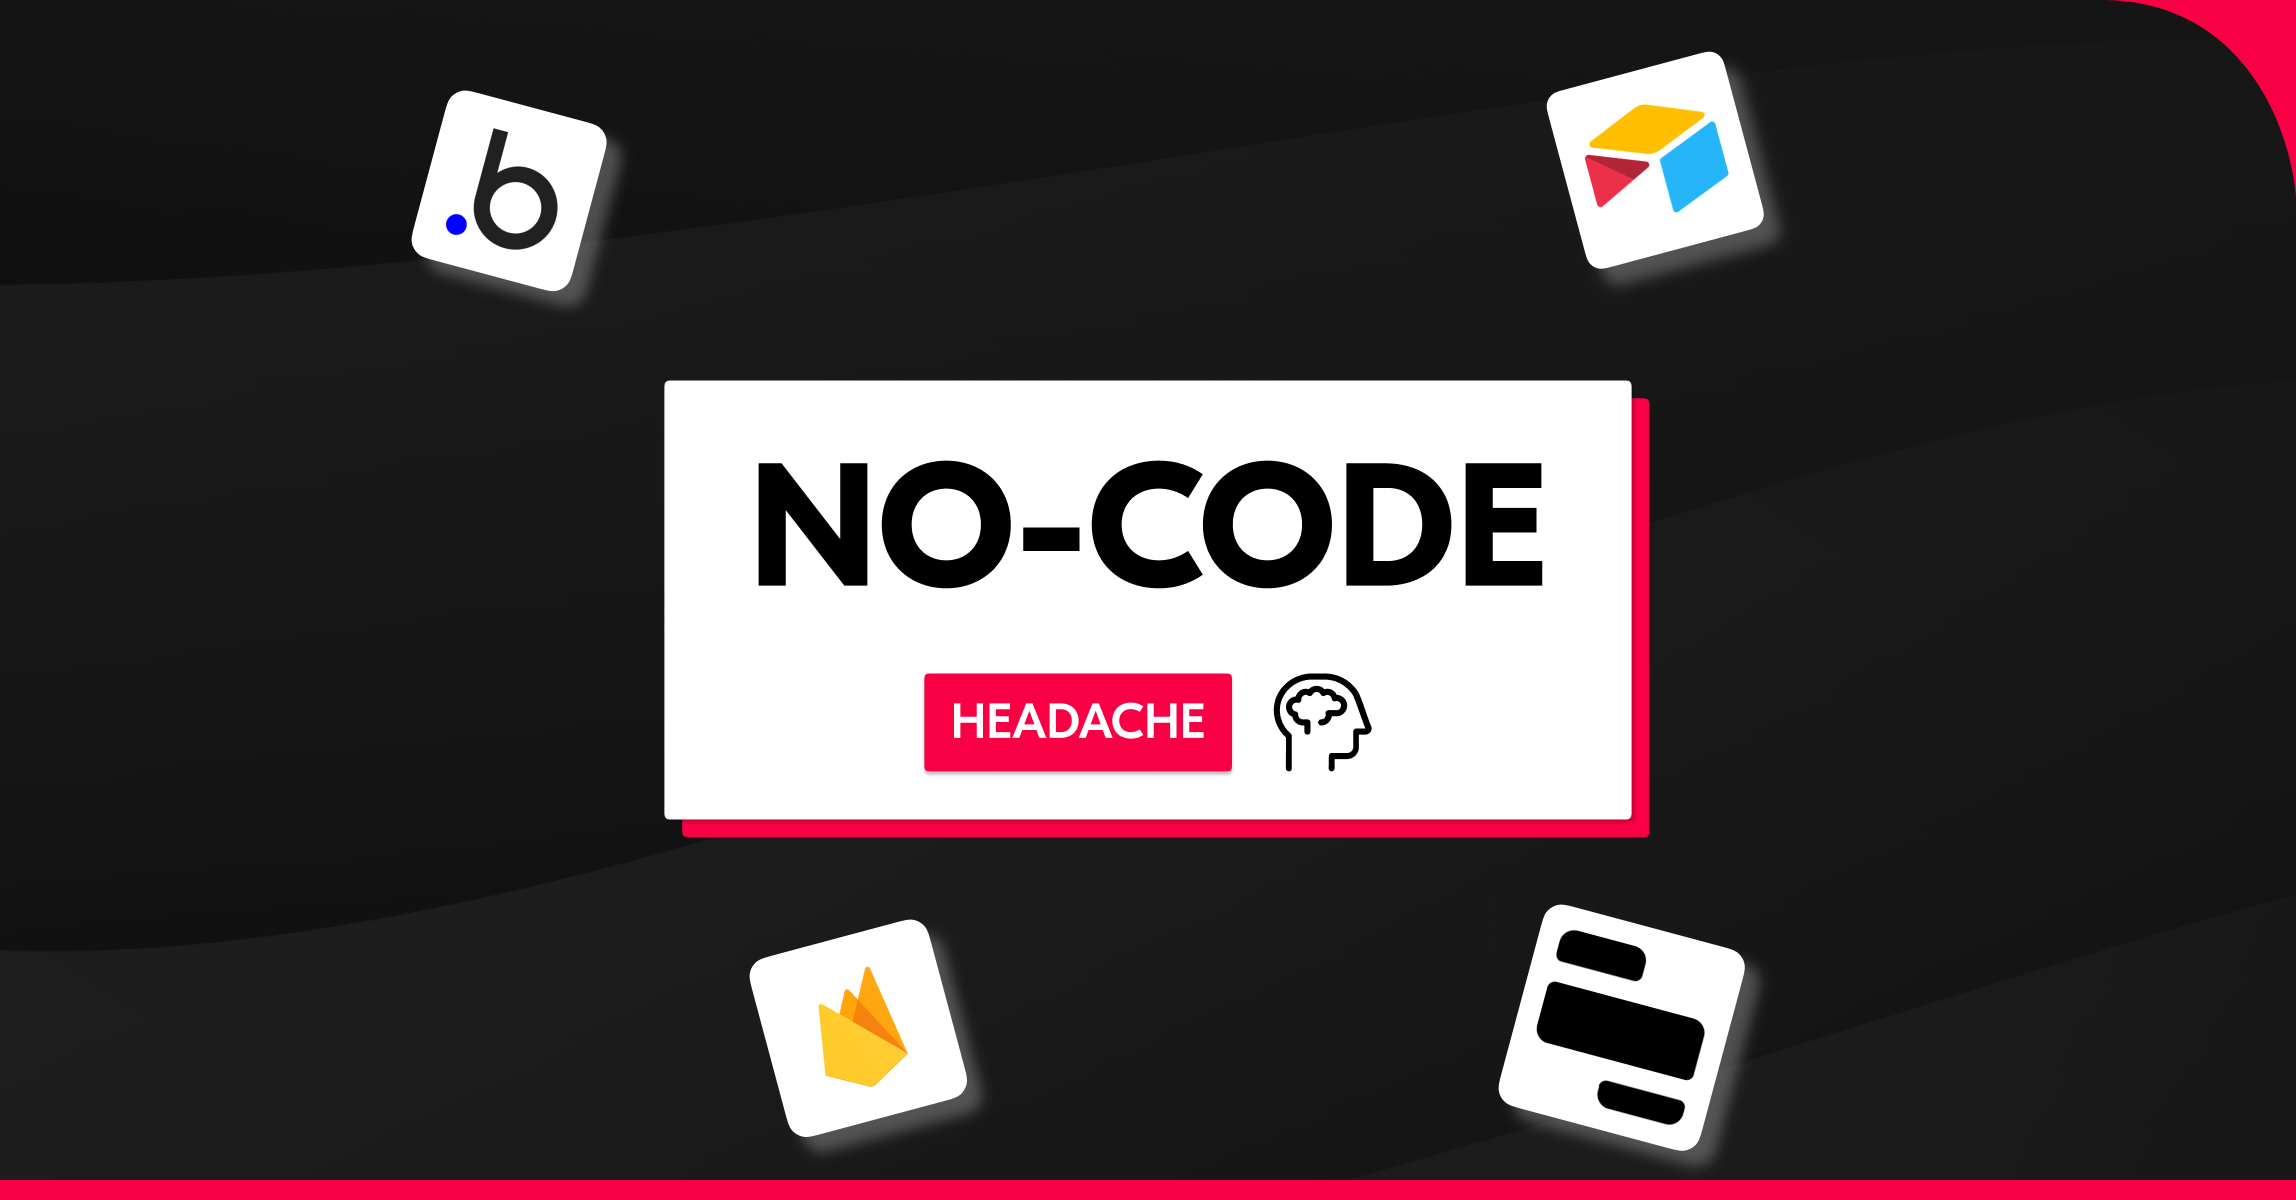 Graphic titled 'NO-CODE HEADACHE' with icons of popular no-code platforms such as Bubble and Airtable, emphasizing the complexity and challenges of using no-code solution.